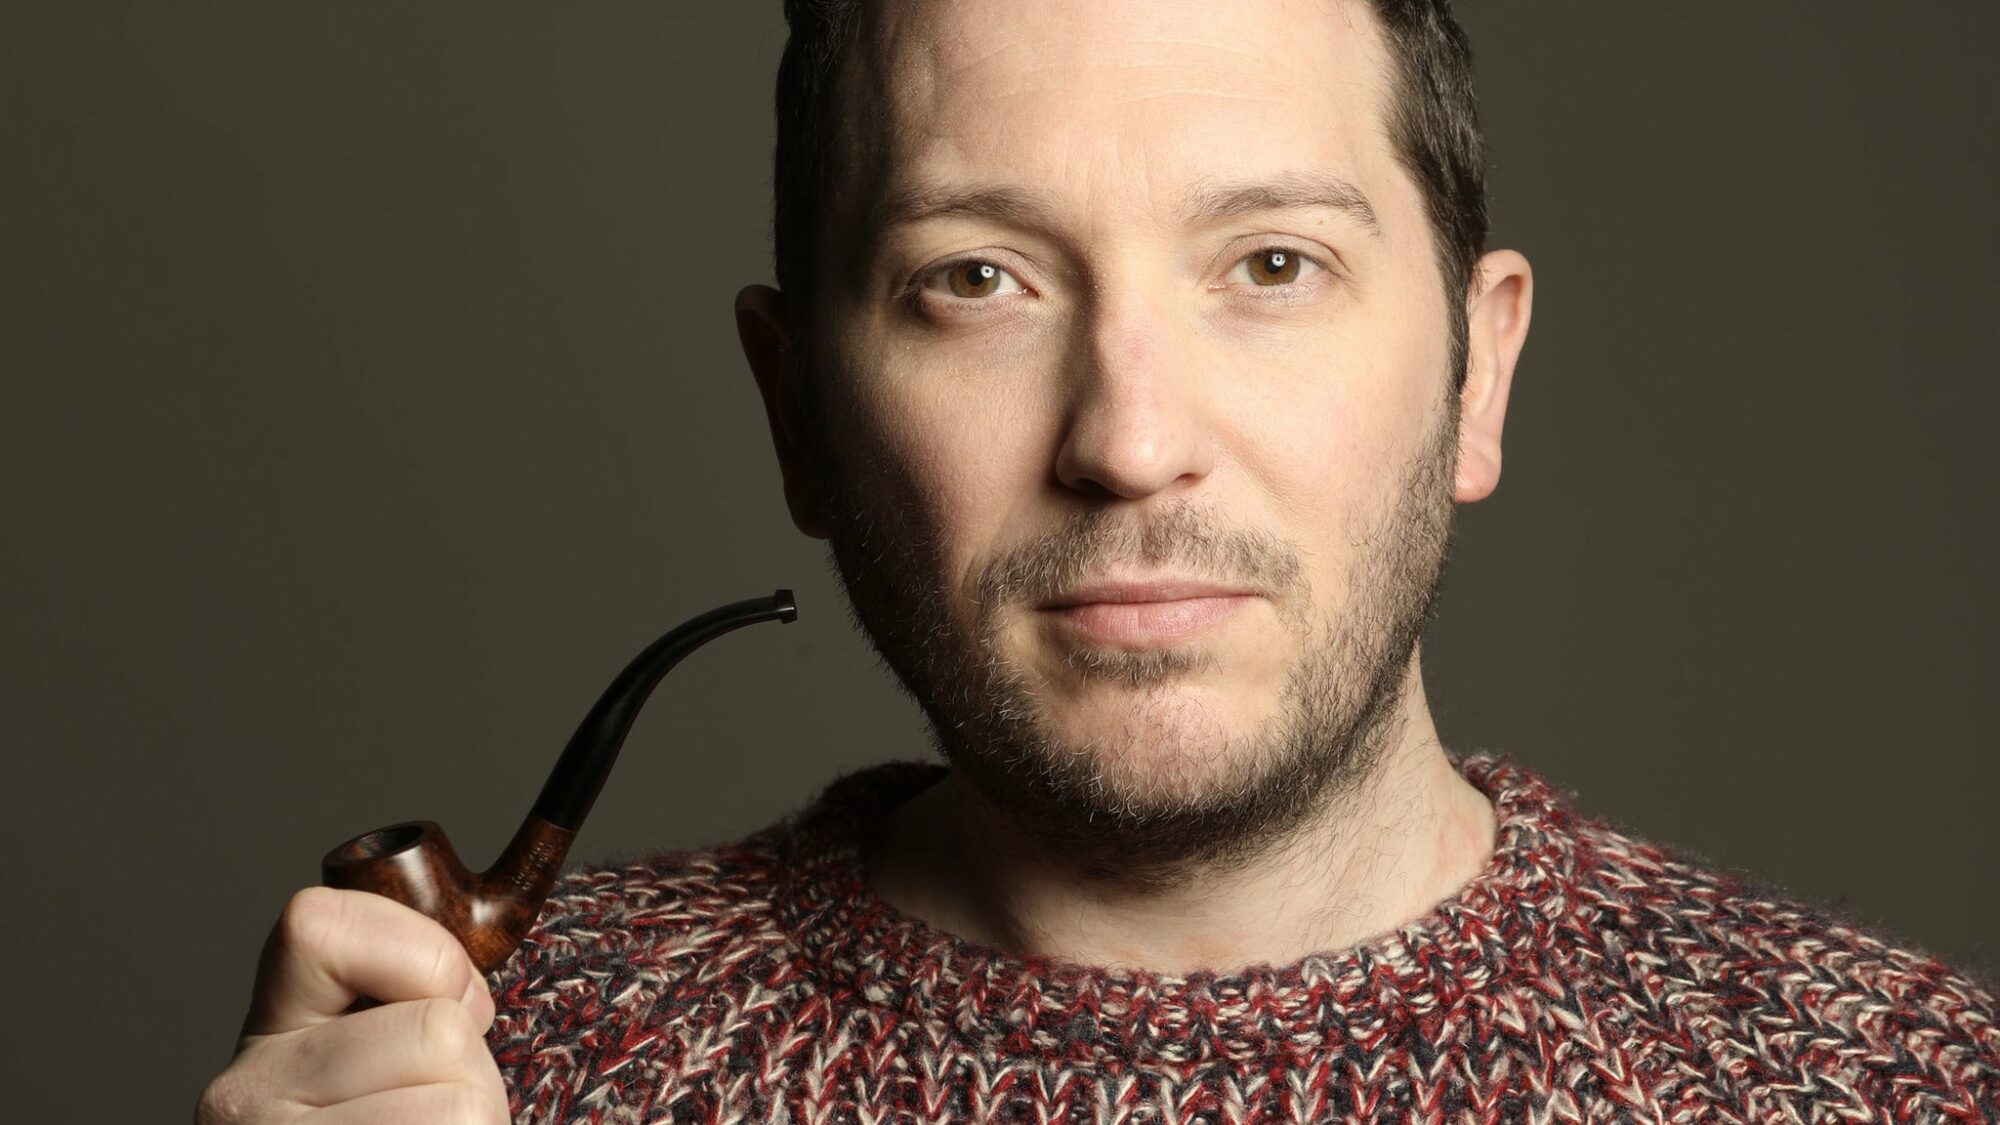 Image name Jon Richardson The Knitwit at Leeds Grand Theatre Leeds the 1 image from the post What’s on next week? From Monday 25th September in Yorkshire.com.